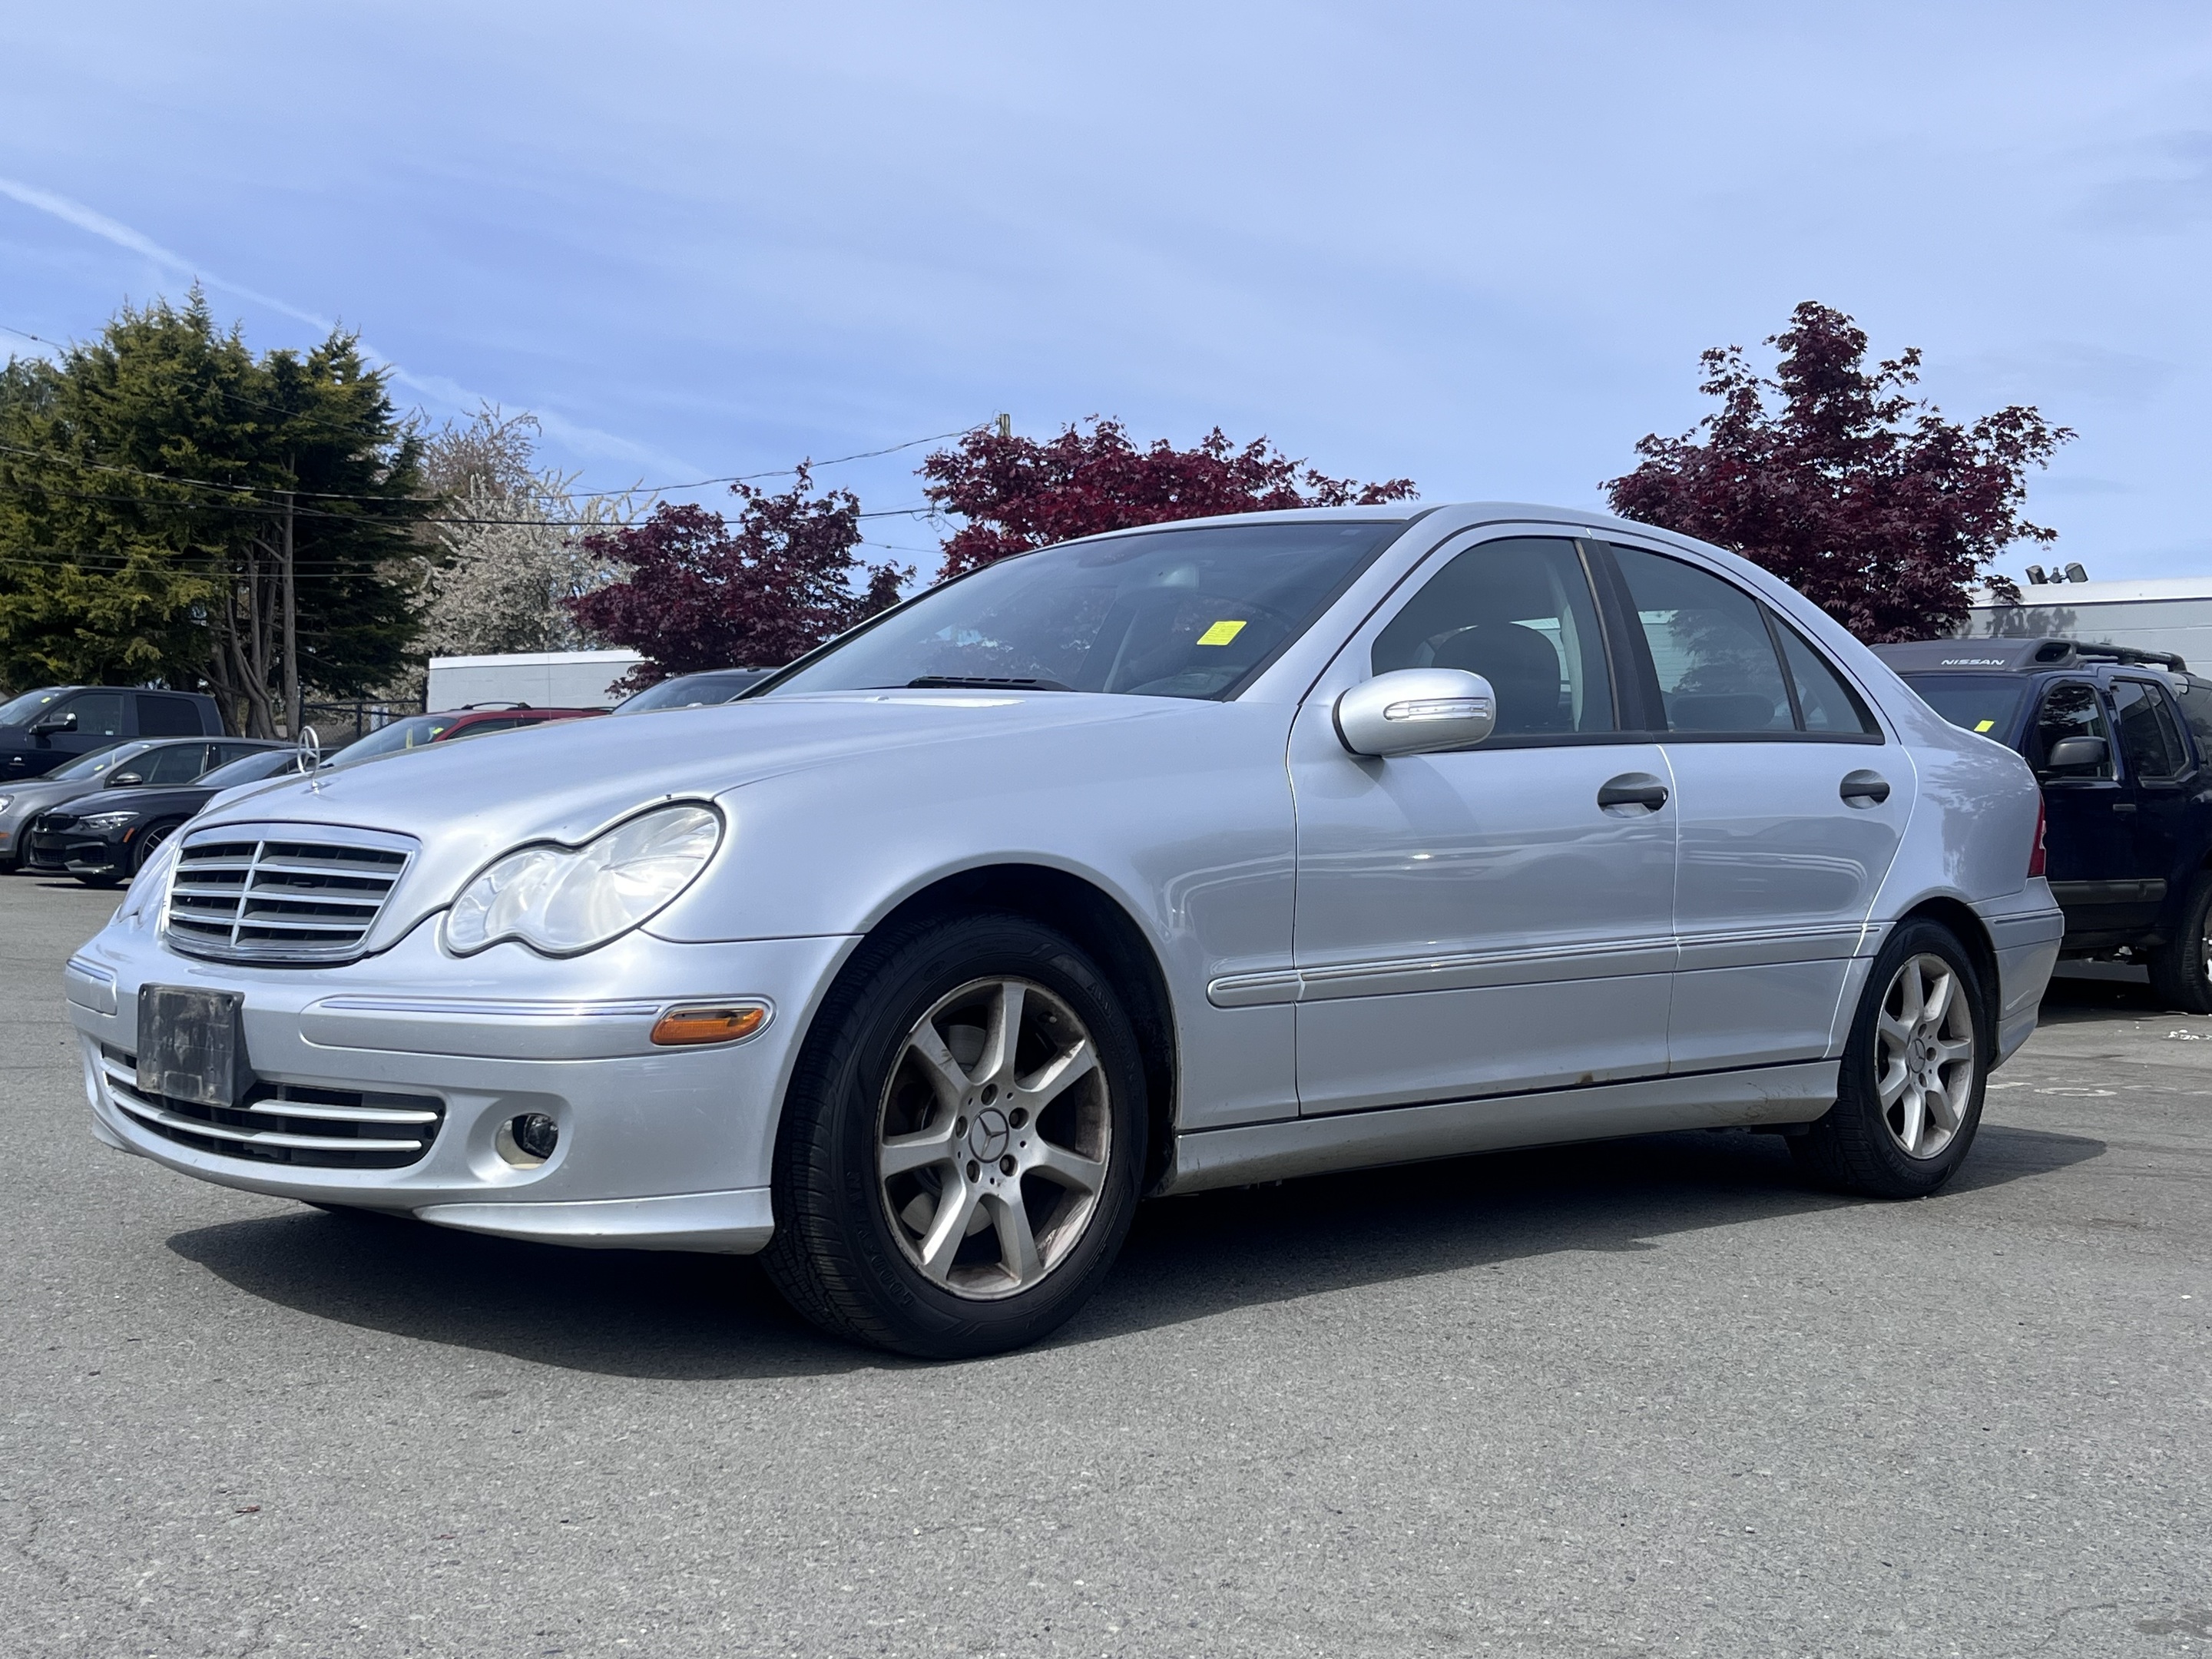 2006 Mercedes-Benz C280 *AS IS* Leather Interior, Sunroof, A/C. 